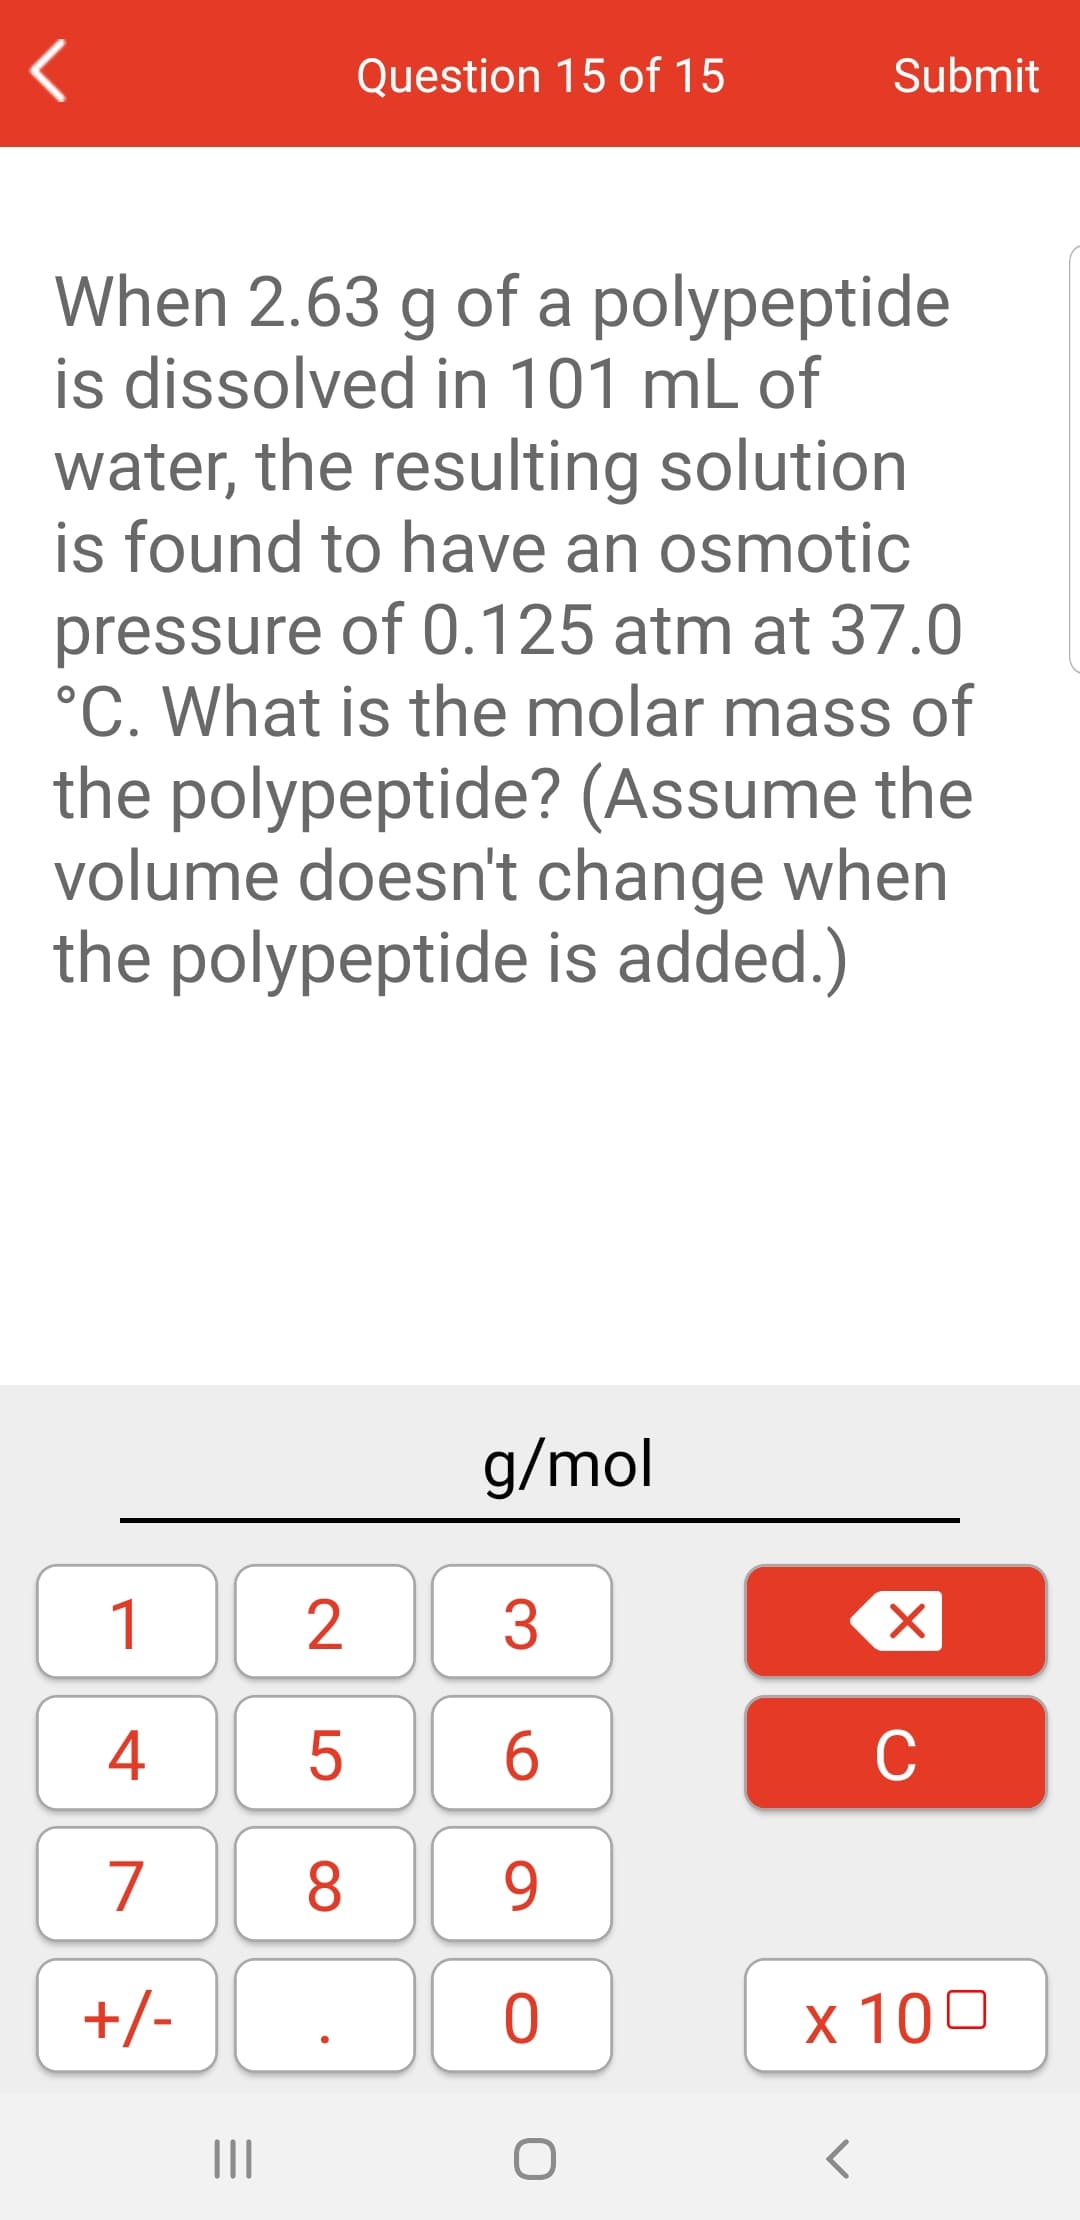 Question 15 of 15
Submit
When 2.63 g of a polypeptide
is dissolved in 101 mL of
water, the resulting solution
is found to have an osmotic
pressure of 0.125 atm at 37.0
°C. What is the molar mass of
the polypeptide? (Assume the
volume doesn't change when
the polypeptide is added.)
g/mol
1
2
3
4
C
7
8
9
+/-
х 100
II
